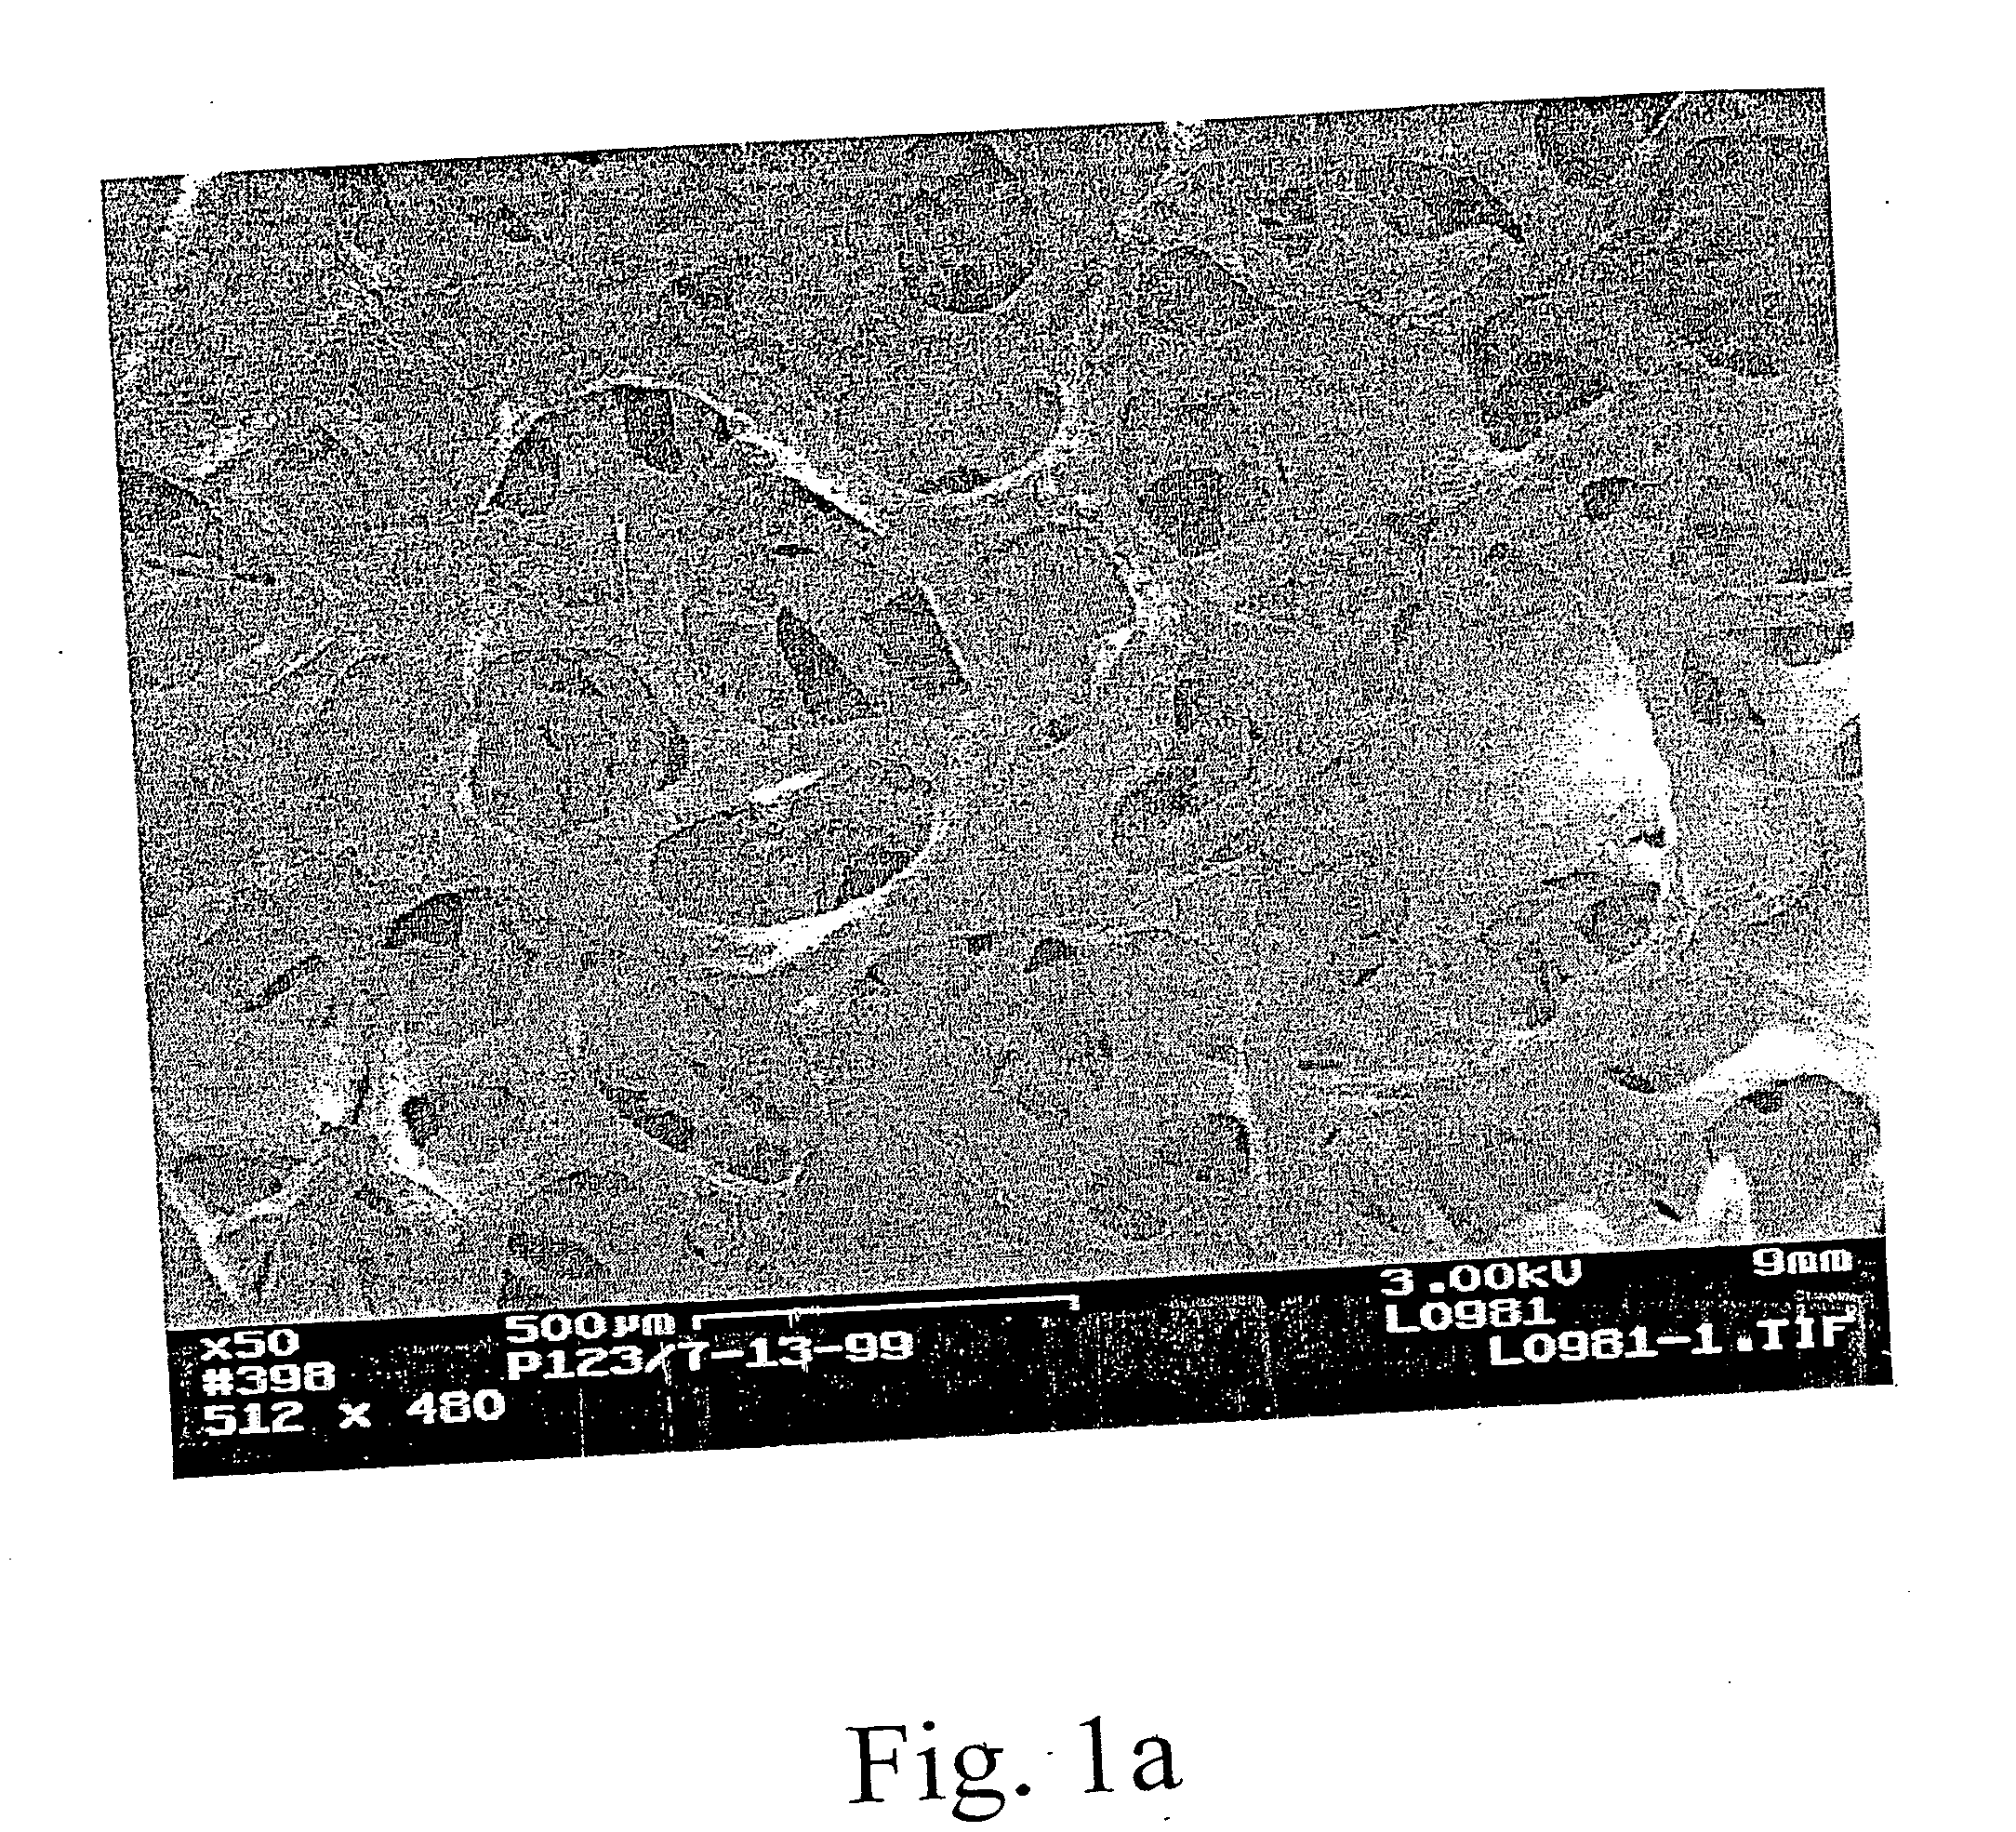 Carbon nanotube-containing catalysts, methods of making, and reactions catalyzed over nanotube catalysts